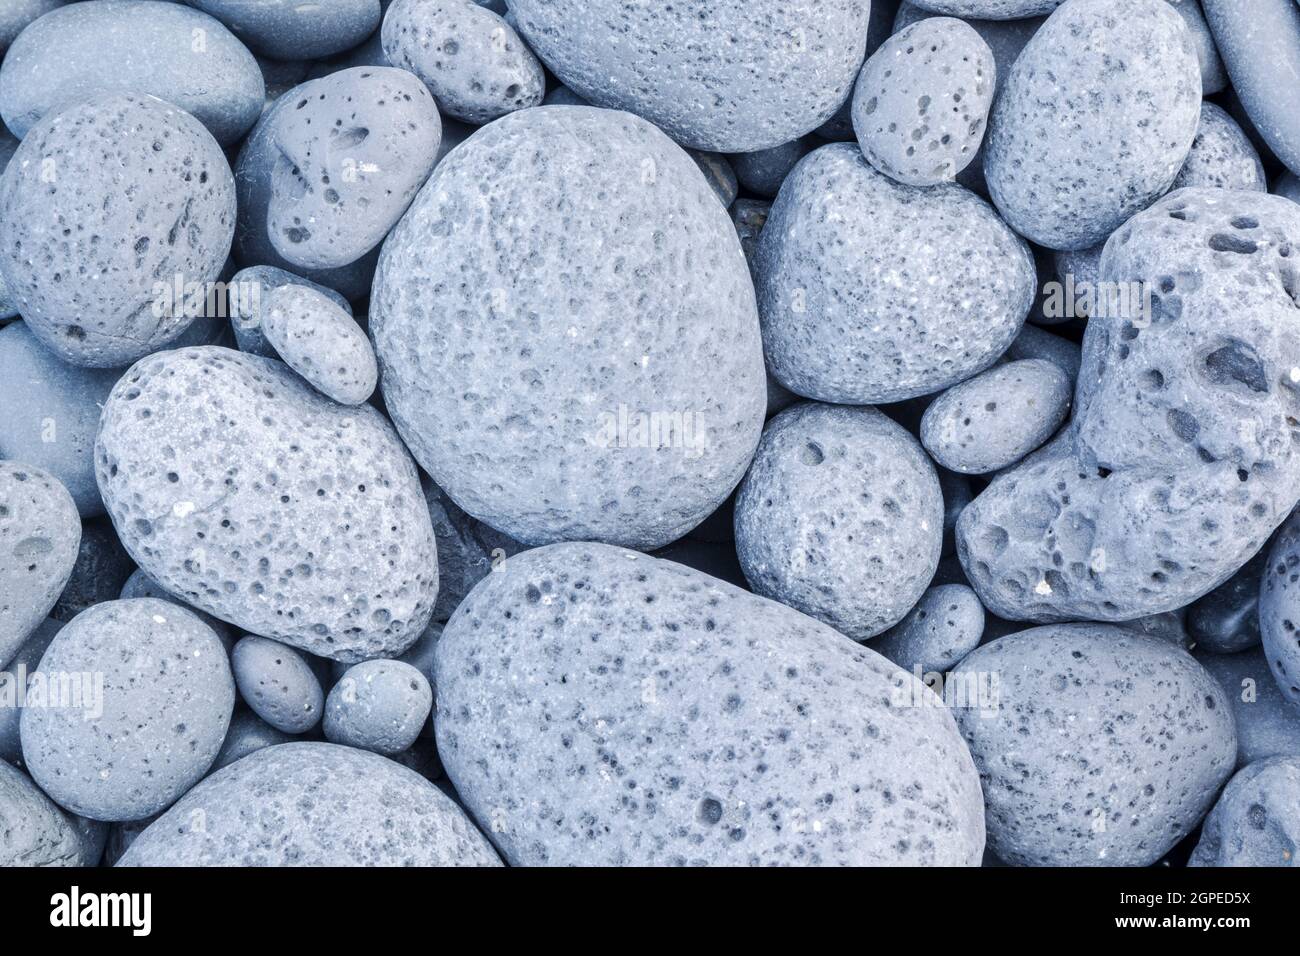 Pale grey beach stones battered and worn by the sea Stock Photo